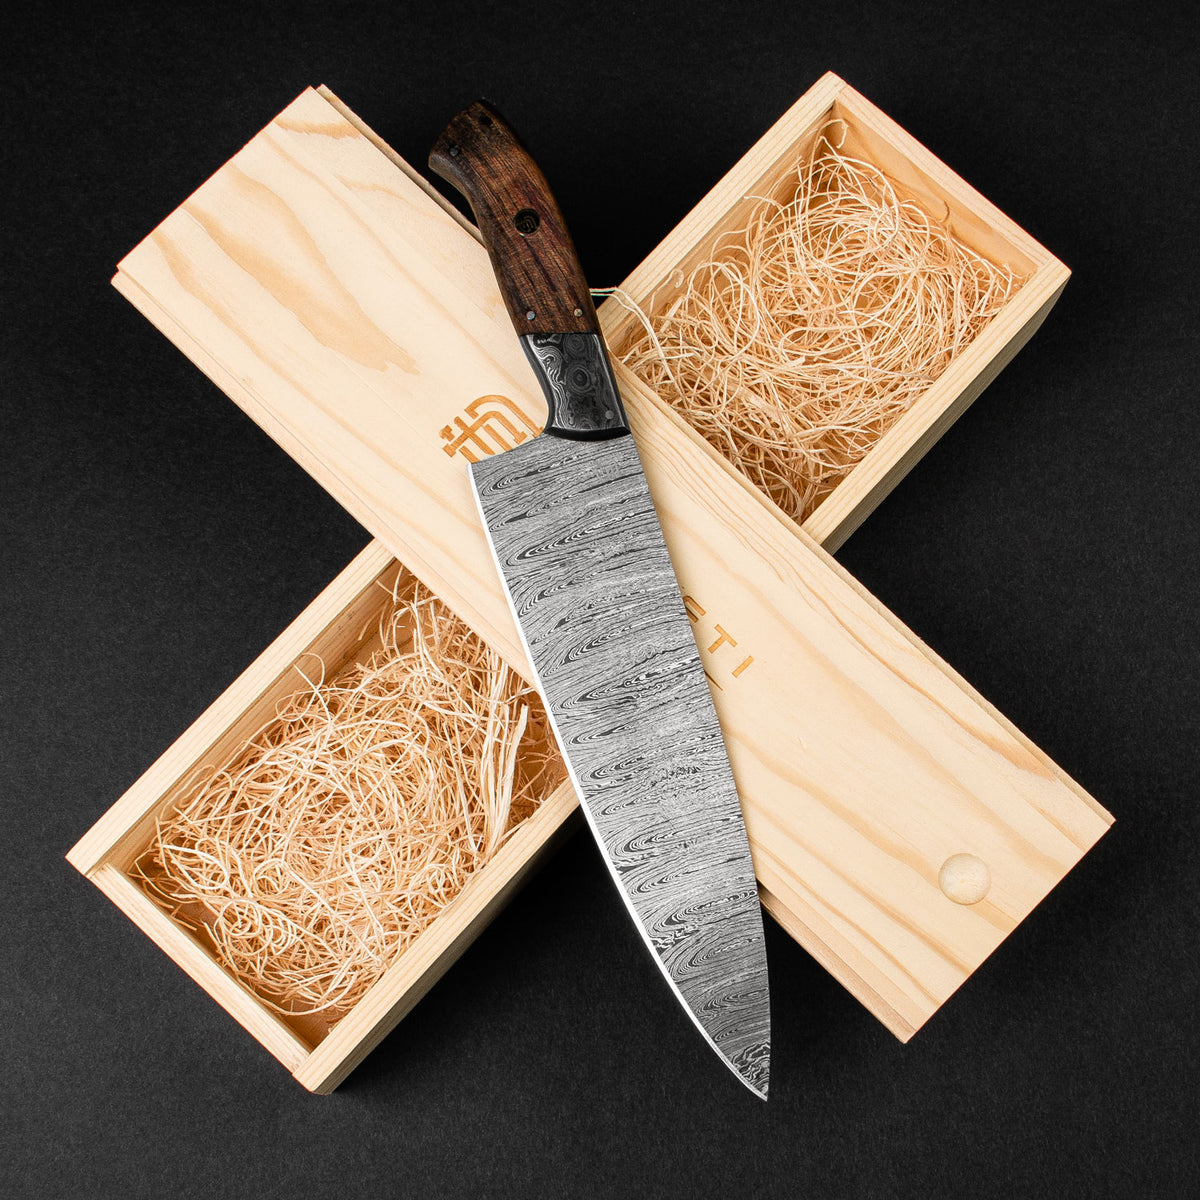 What are Damascus chef knives?